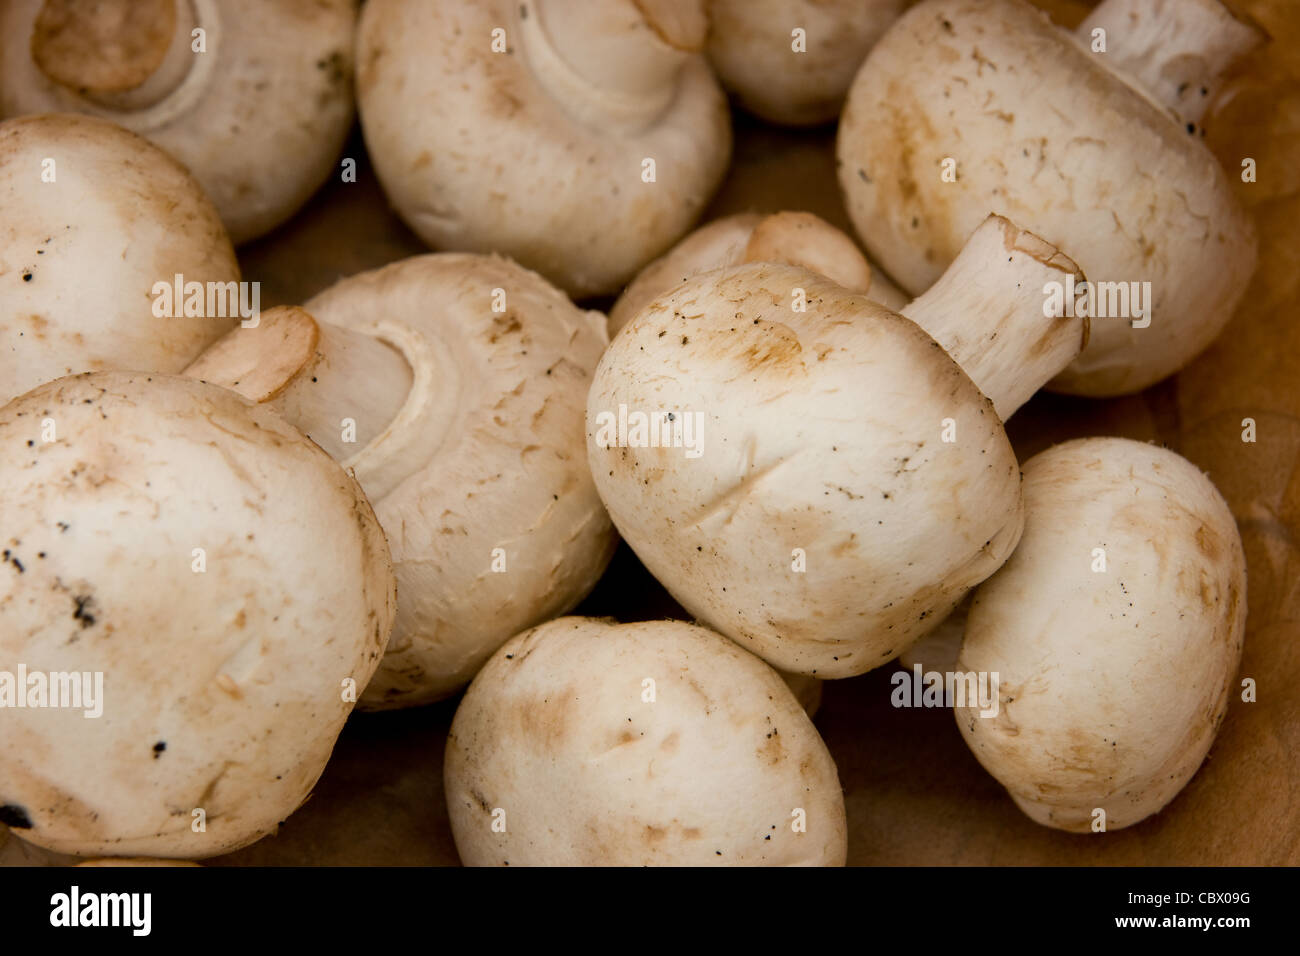 Champignons in a bag Stock Photo